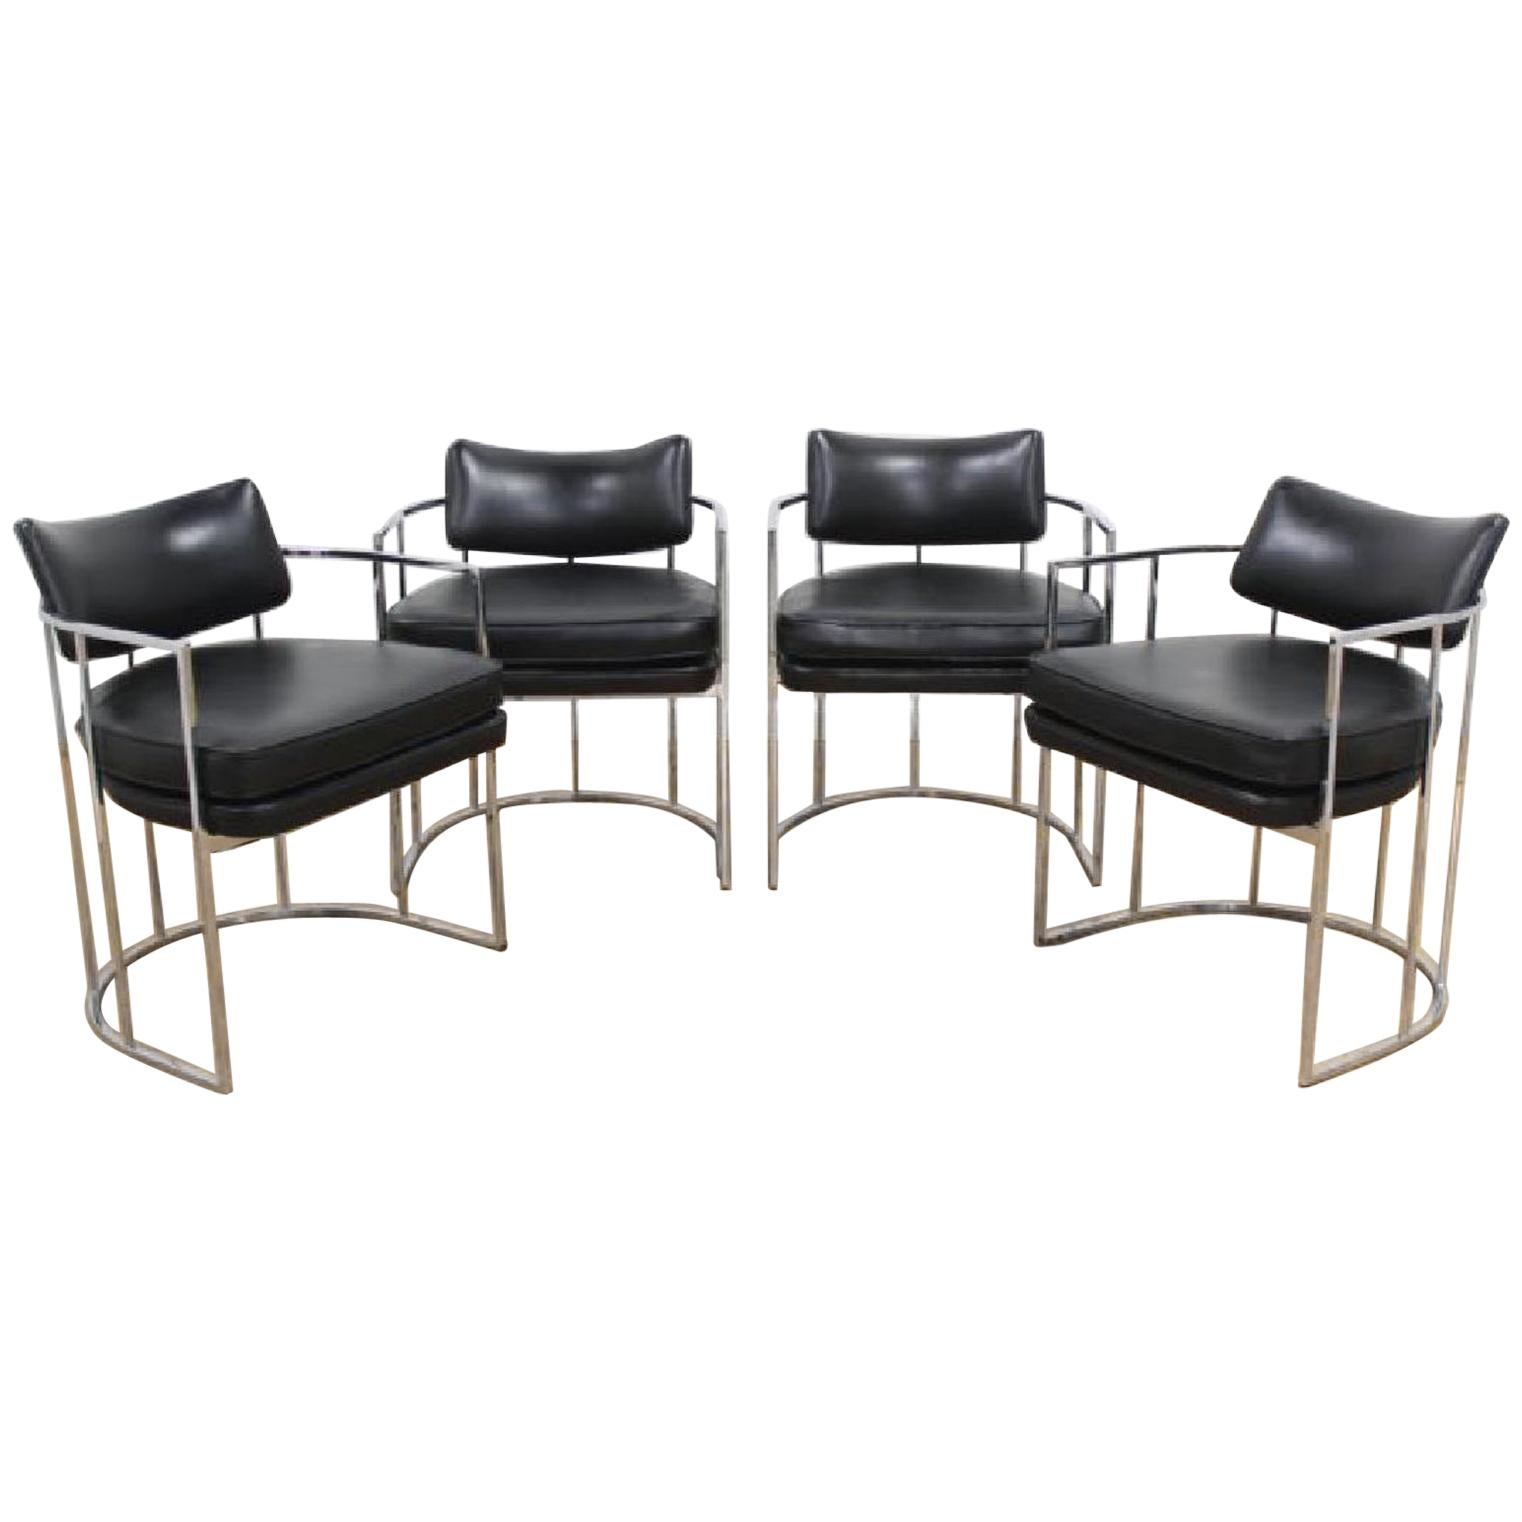 Set of Four Midcentury Milo Baughman Dining Chairs in Black For Sale